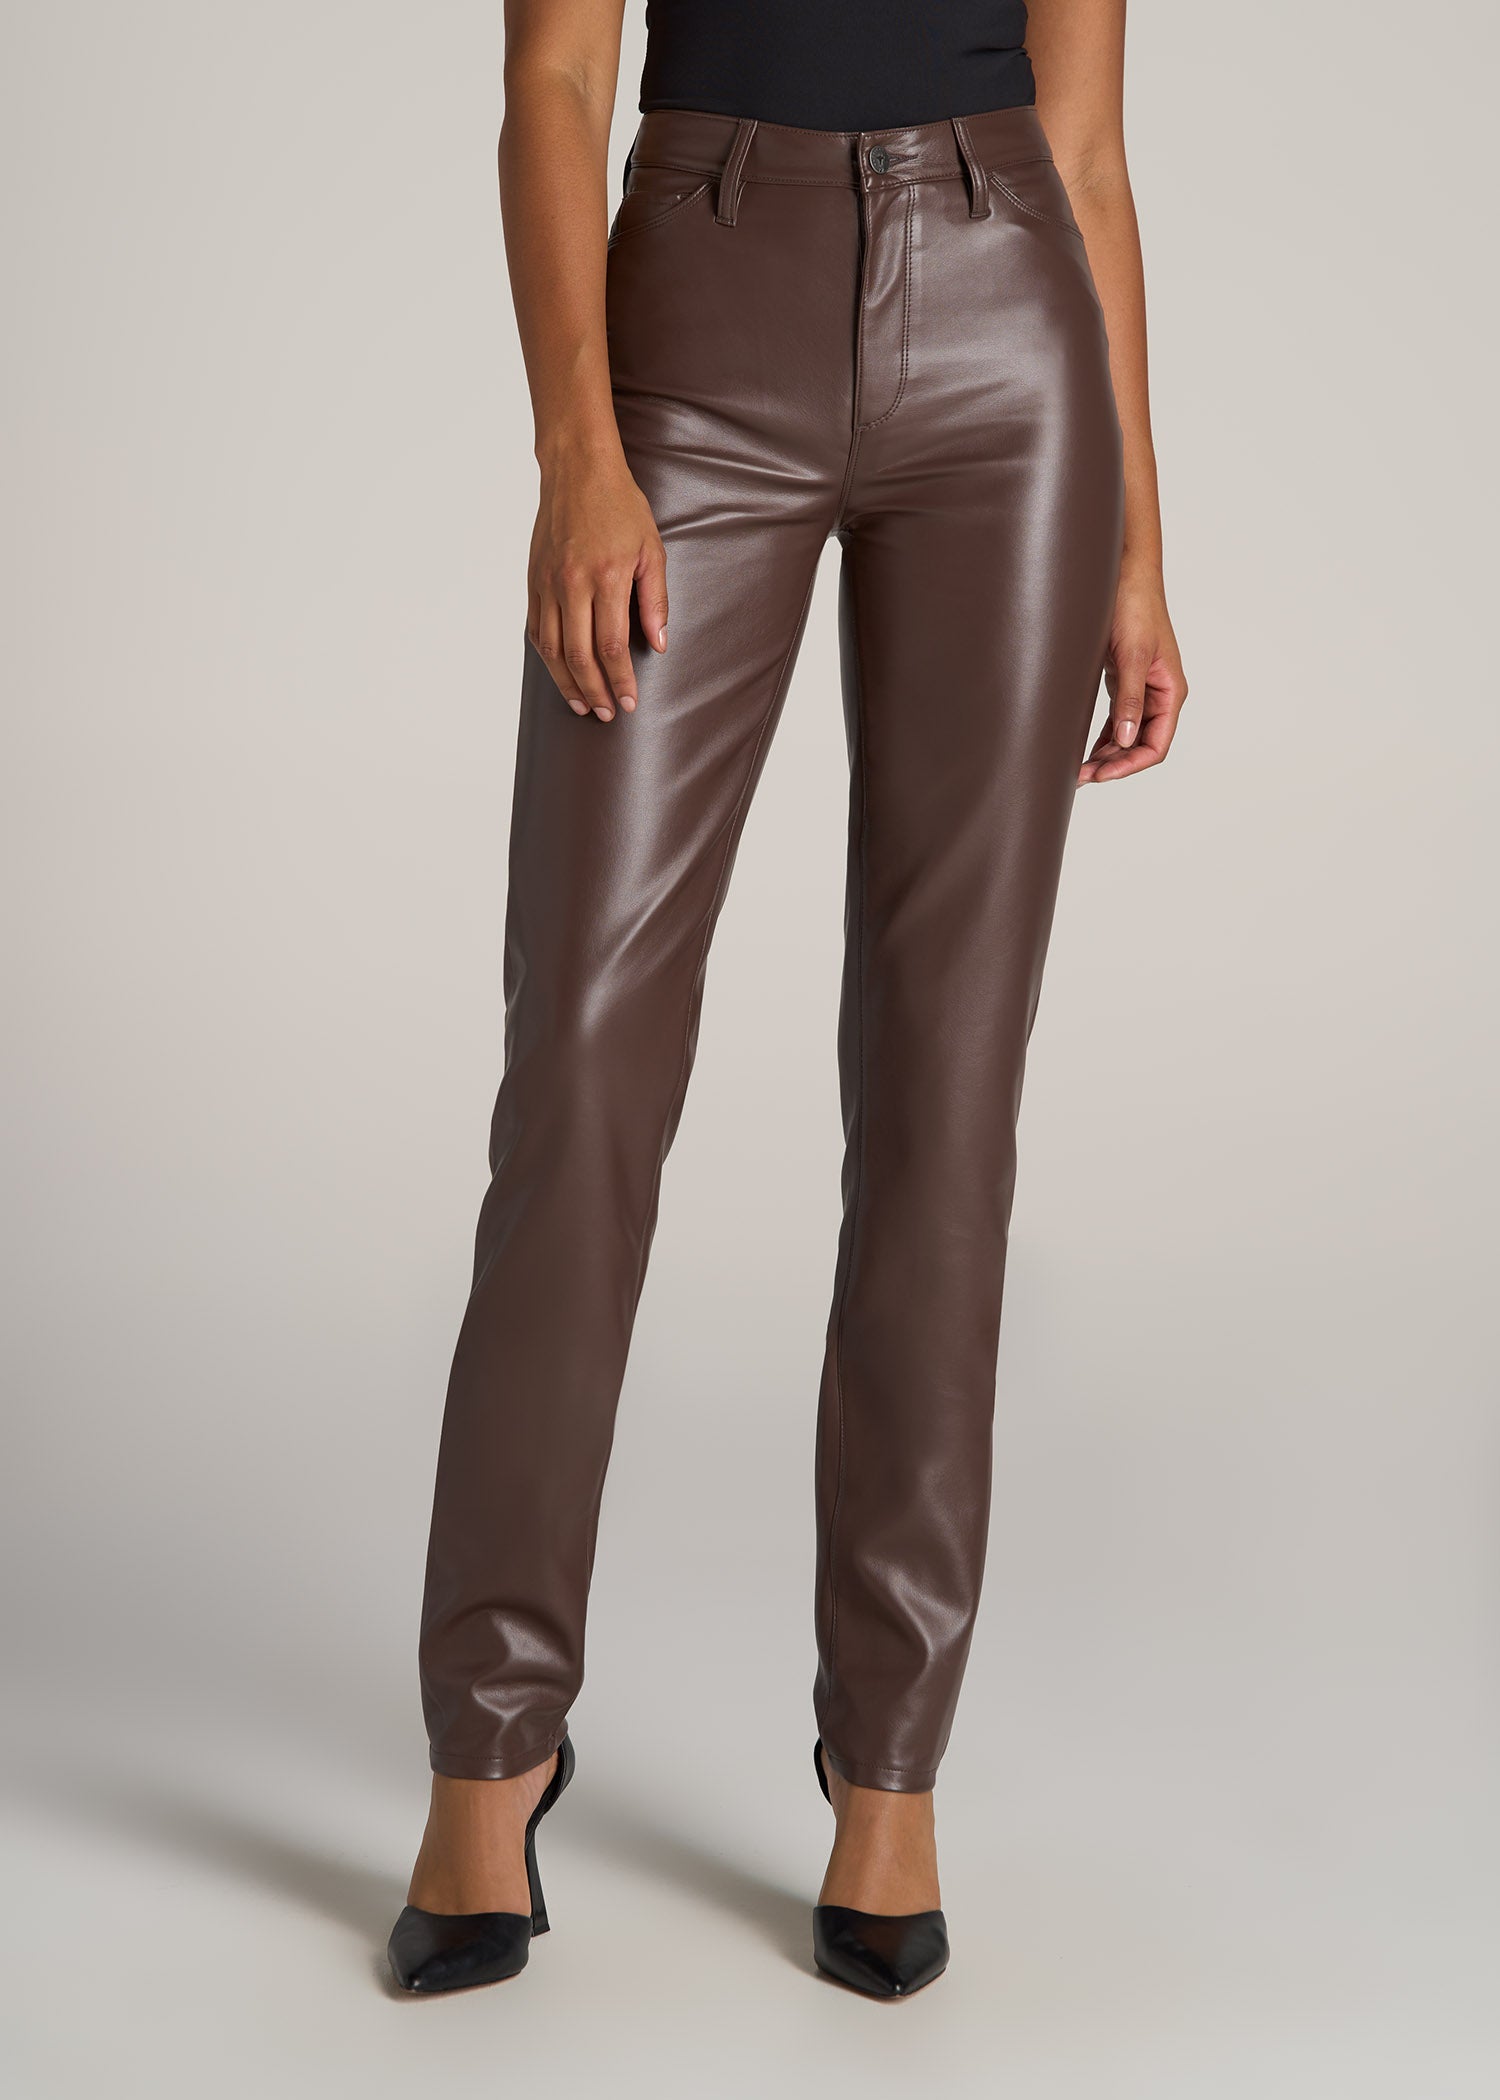 Women's Leather Trousers, Leather Pants for Women